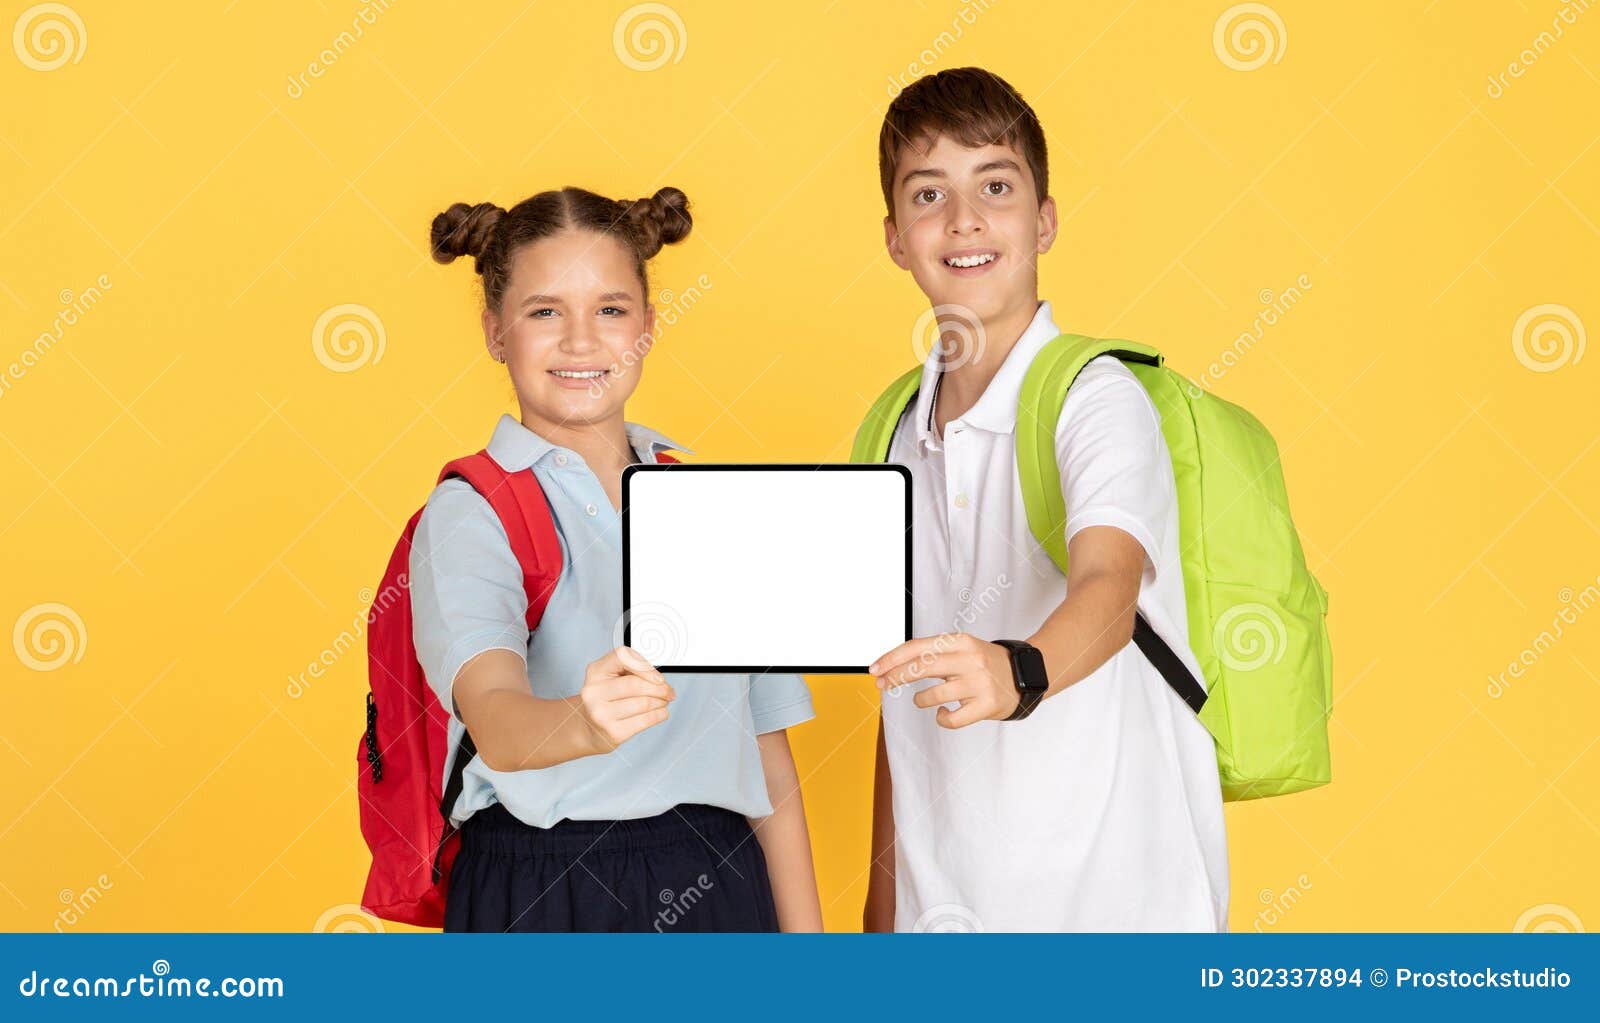 a schoolgirl and schoolboy with backpacks smilingly present a tablet with a white screen